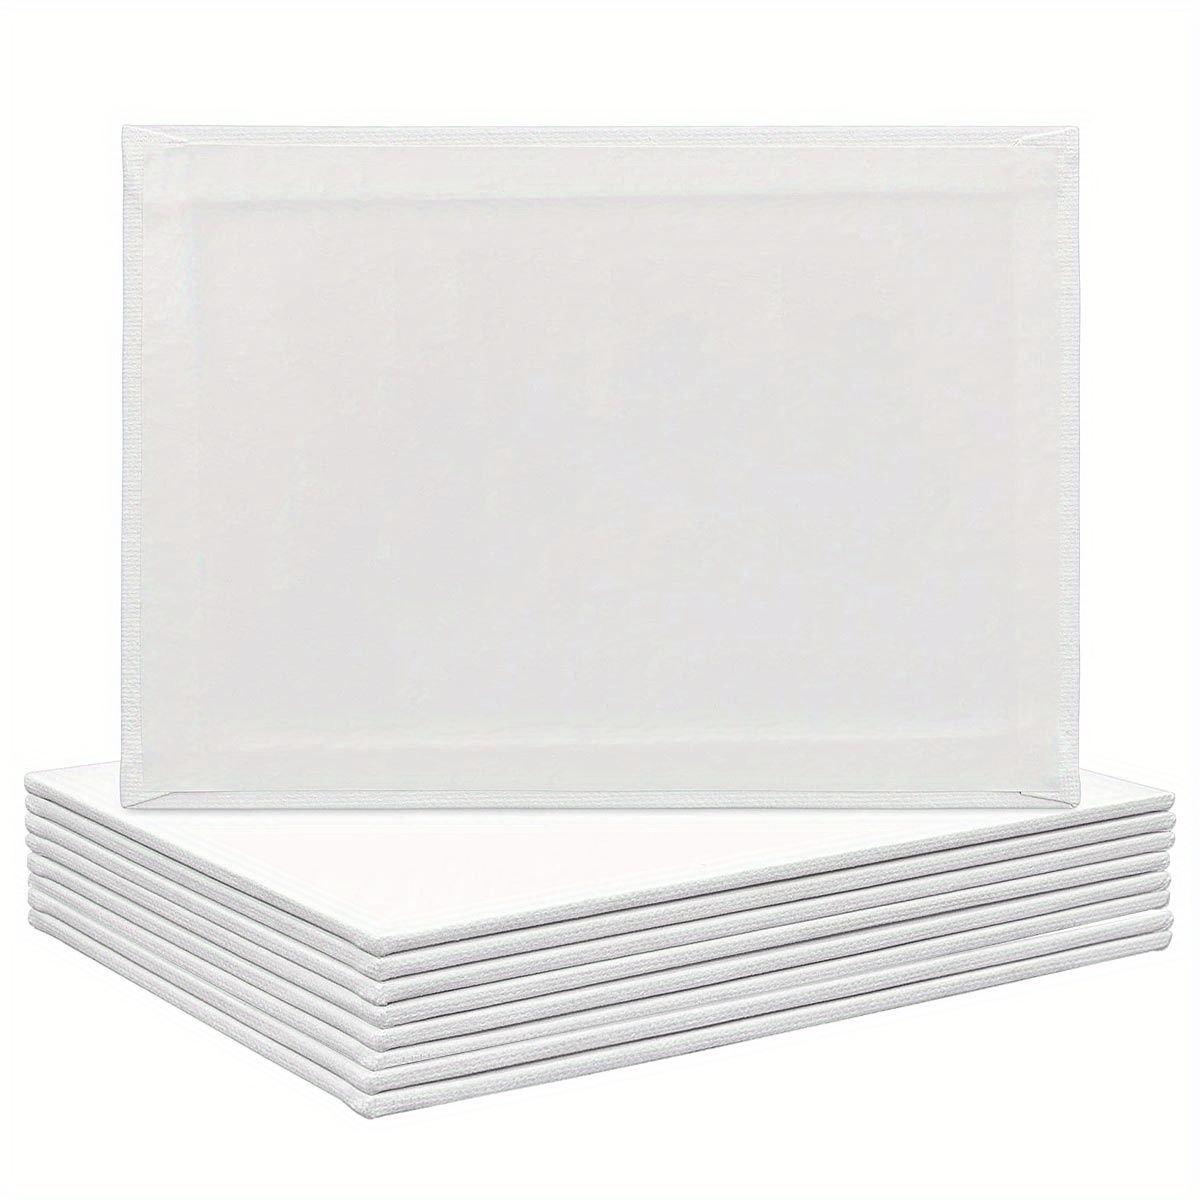 12pcs Canvas Boards For Painting, 8 X 10 Inch (20 X 25 Cm) Paint Canvases  For Painting, 100% Cotton Blank White Art Canvas Boards, 8 Oz Gesso-Primed